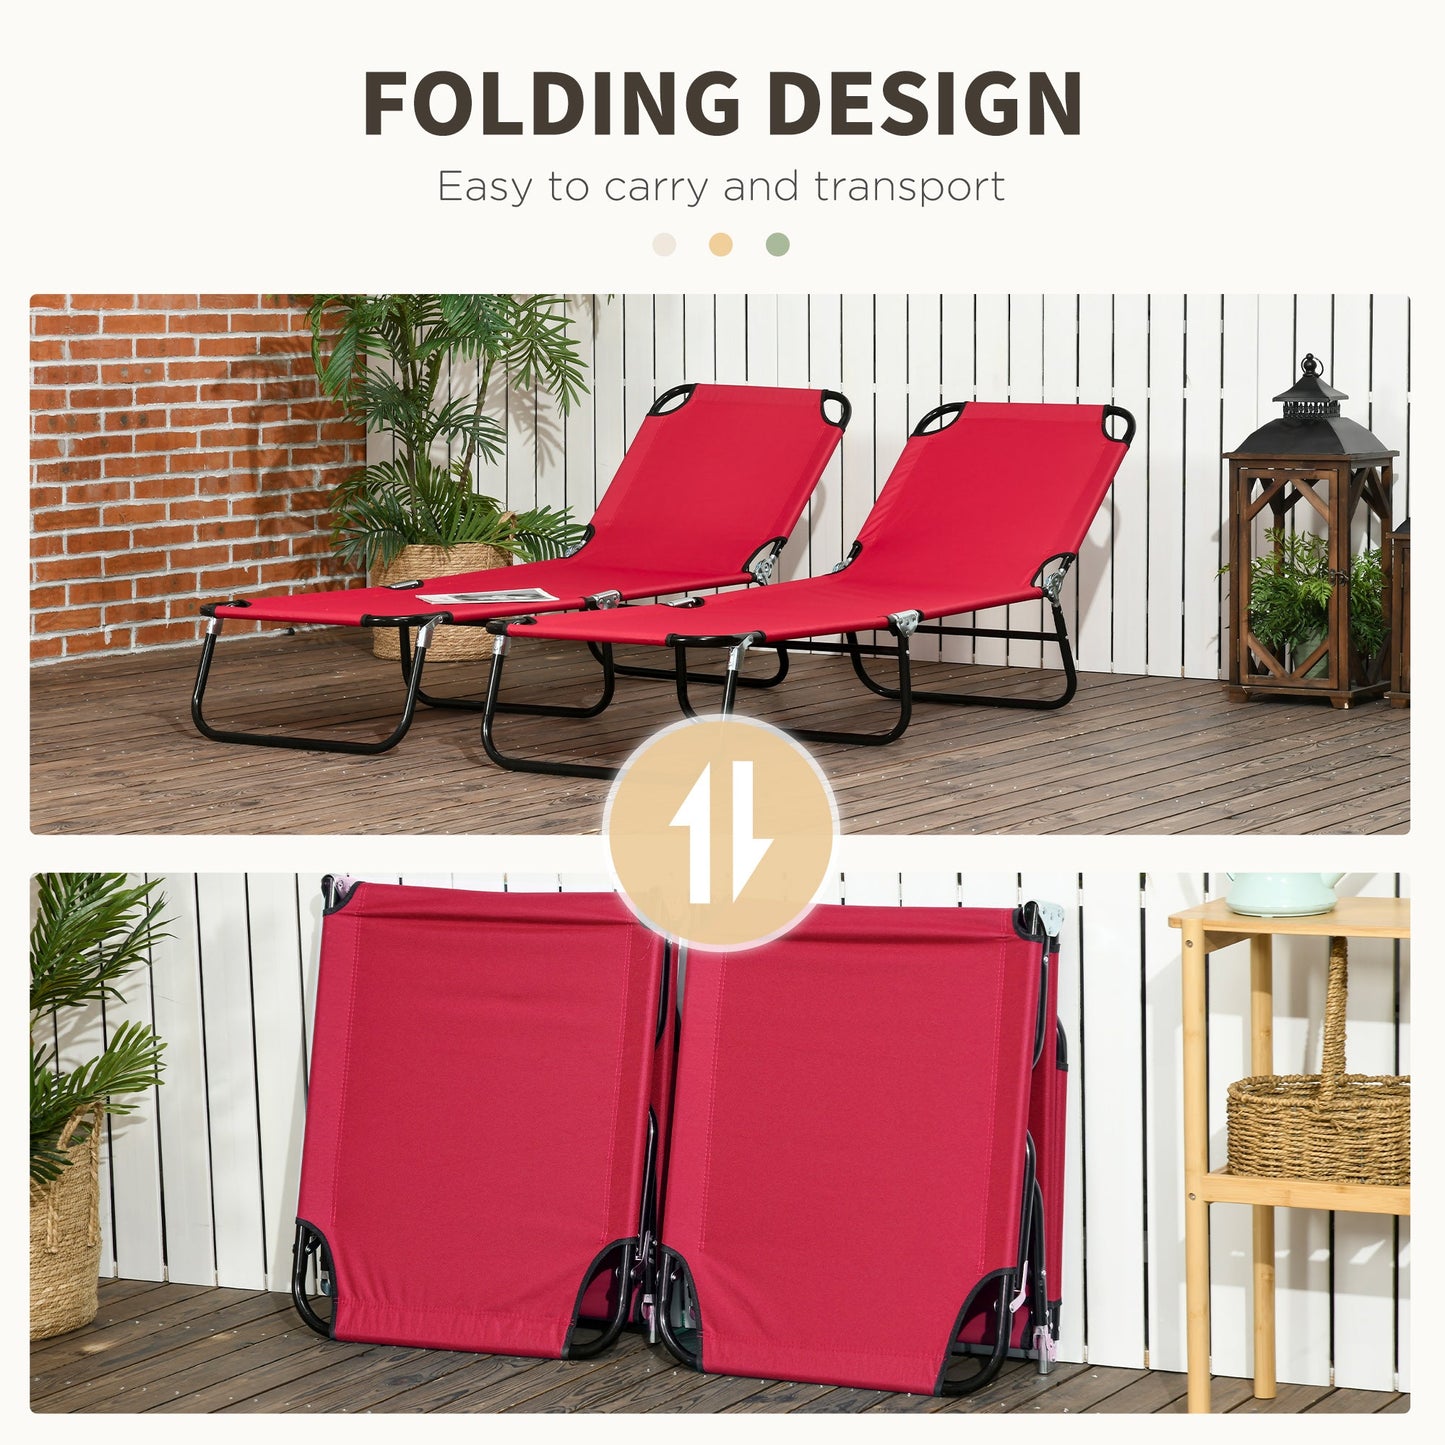 -Outsunny Folding Chaise Lounge Pool Chairs, Set of 2 Outdoor Sun Tanning Chairs, 5-Position Reclining Back & Oxford Fabric for Beach, Patio, Wine Red - Outdoor Style Company